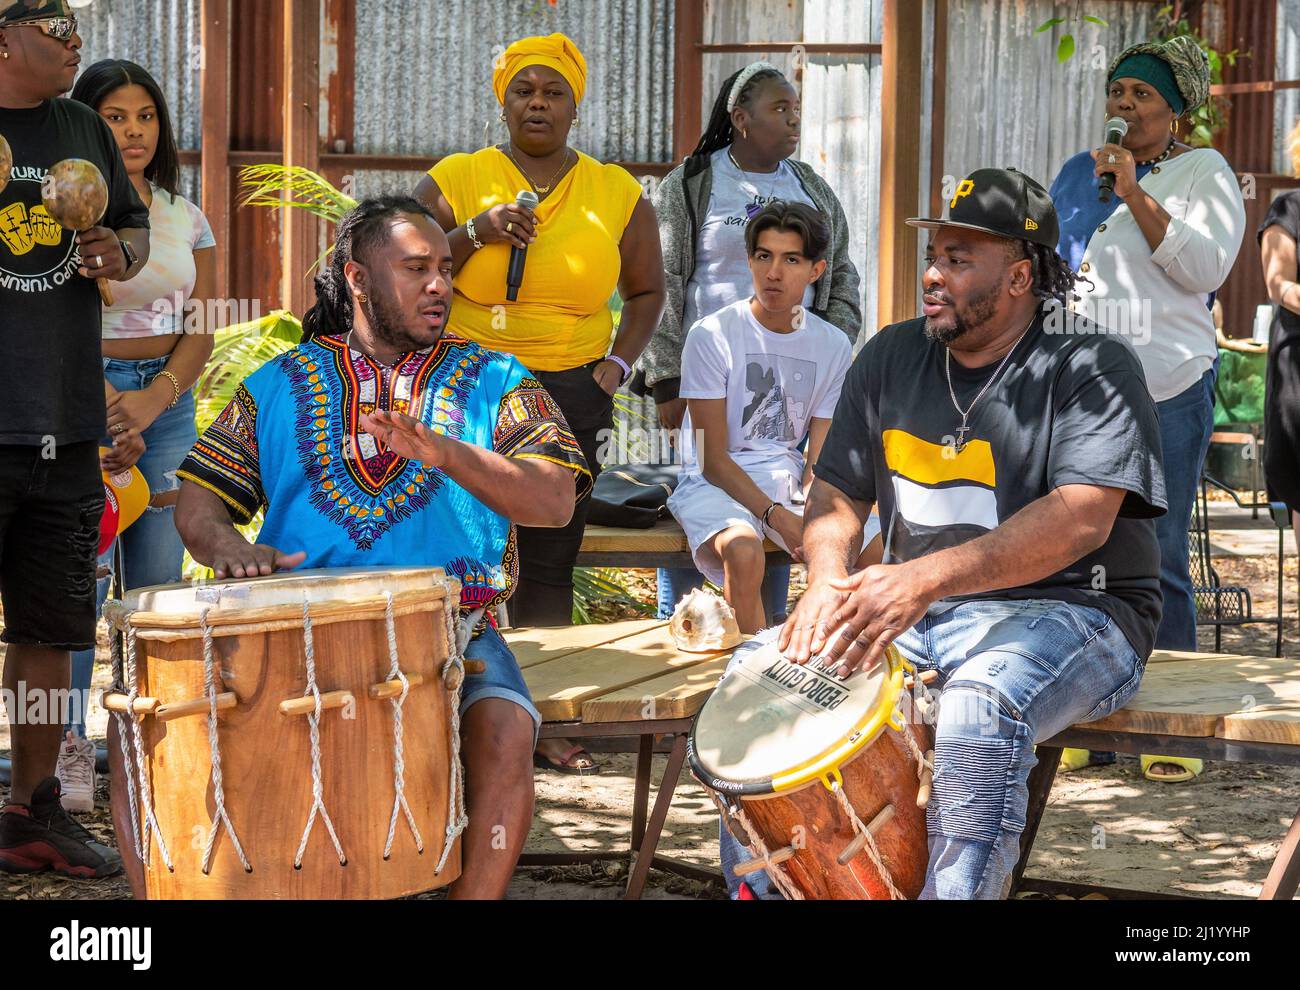 Grupo Yurumeina conduct a drum demonstration and workshop during Garifuna Community Day at the Music Box Village in New Orleans, Louisiana, USA. Stock Photo